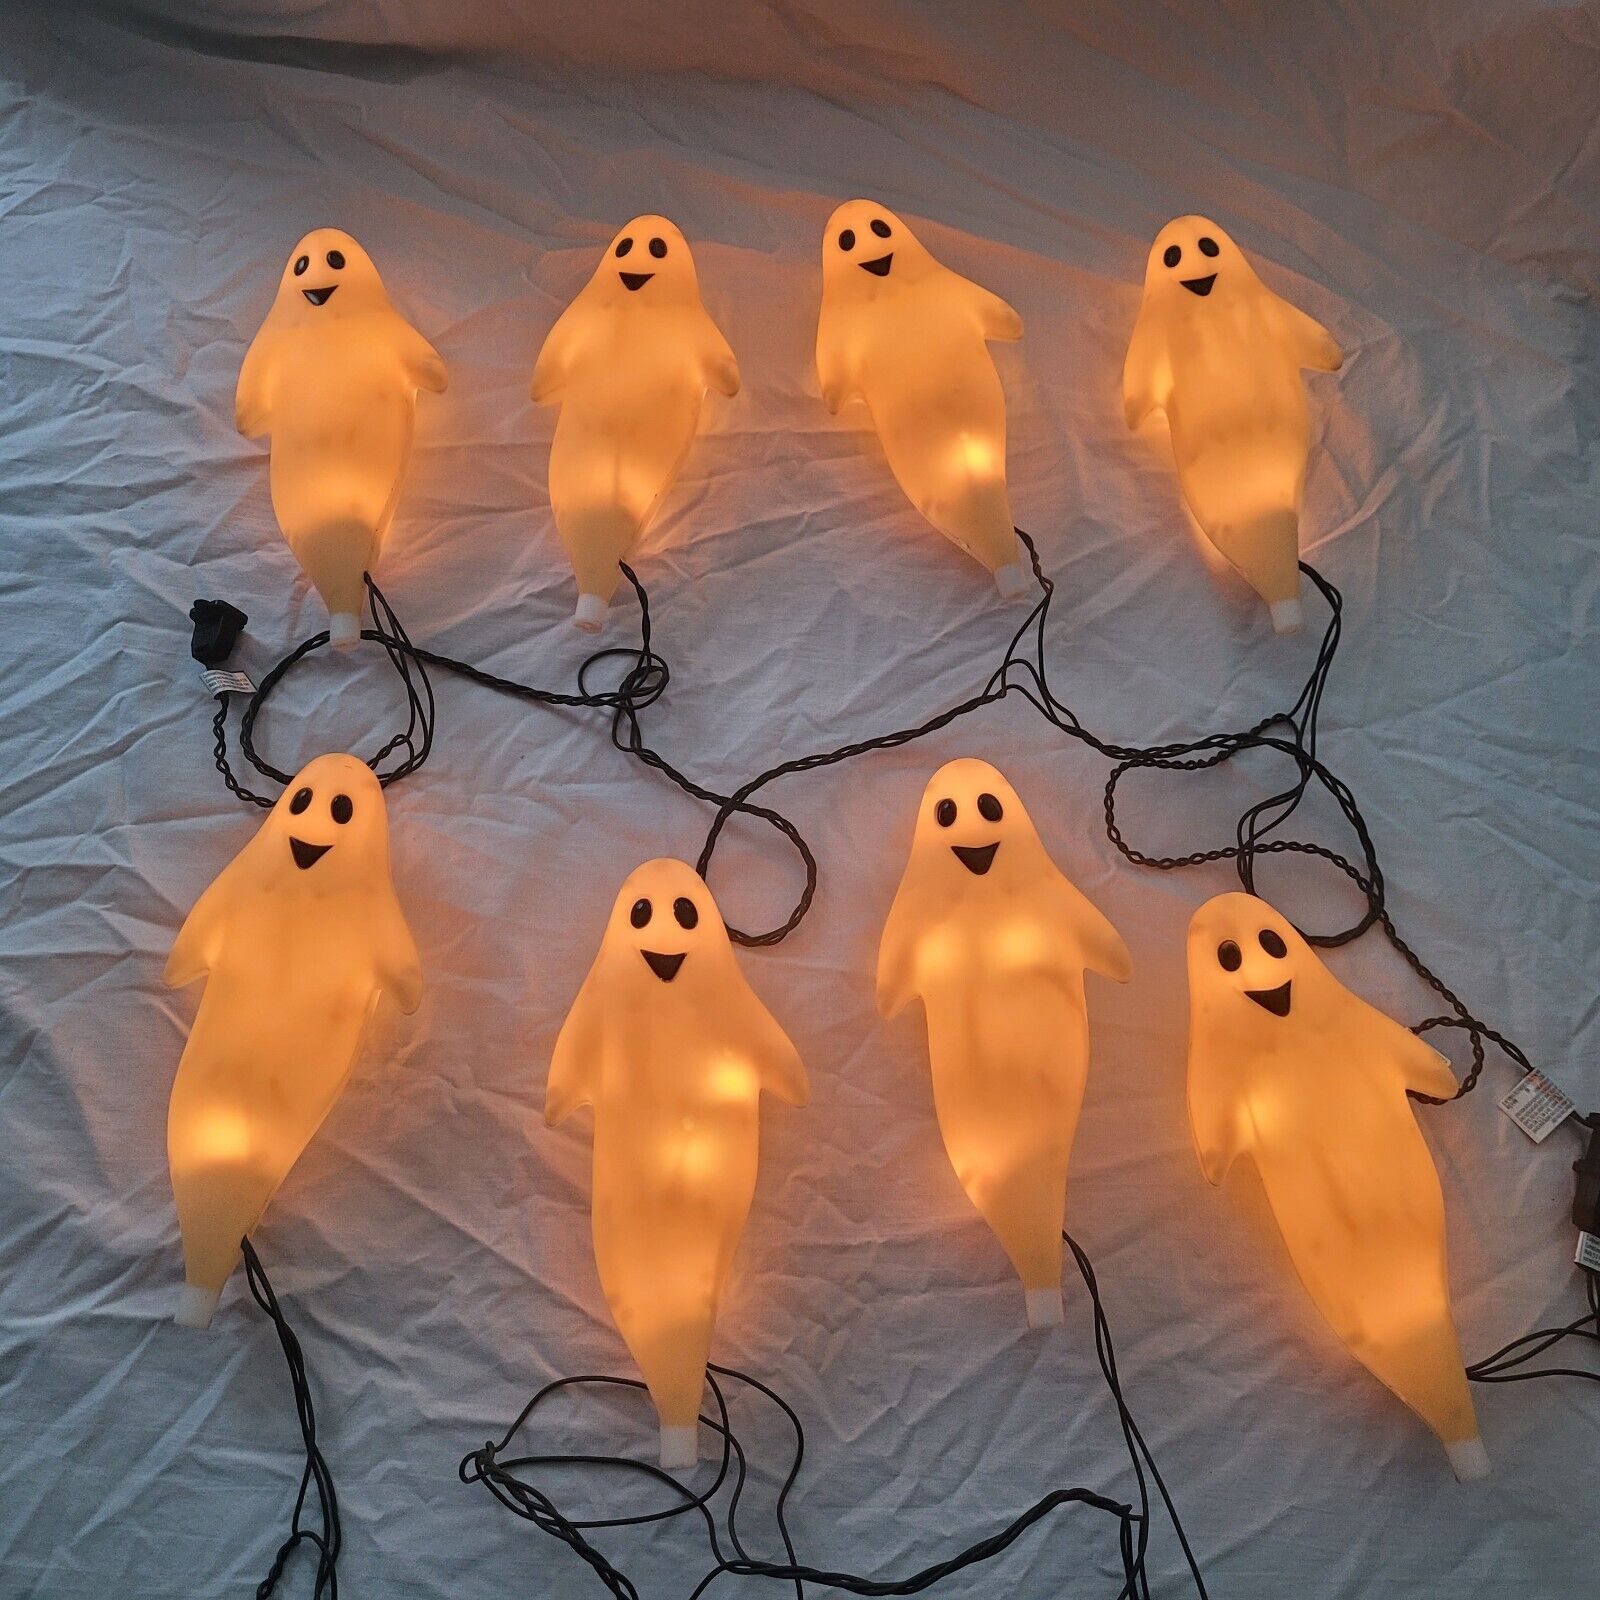 8 Vintage Halloween Blow Mold Floating Ghost Lawn Pathway Lights No Stakes Works